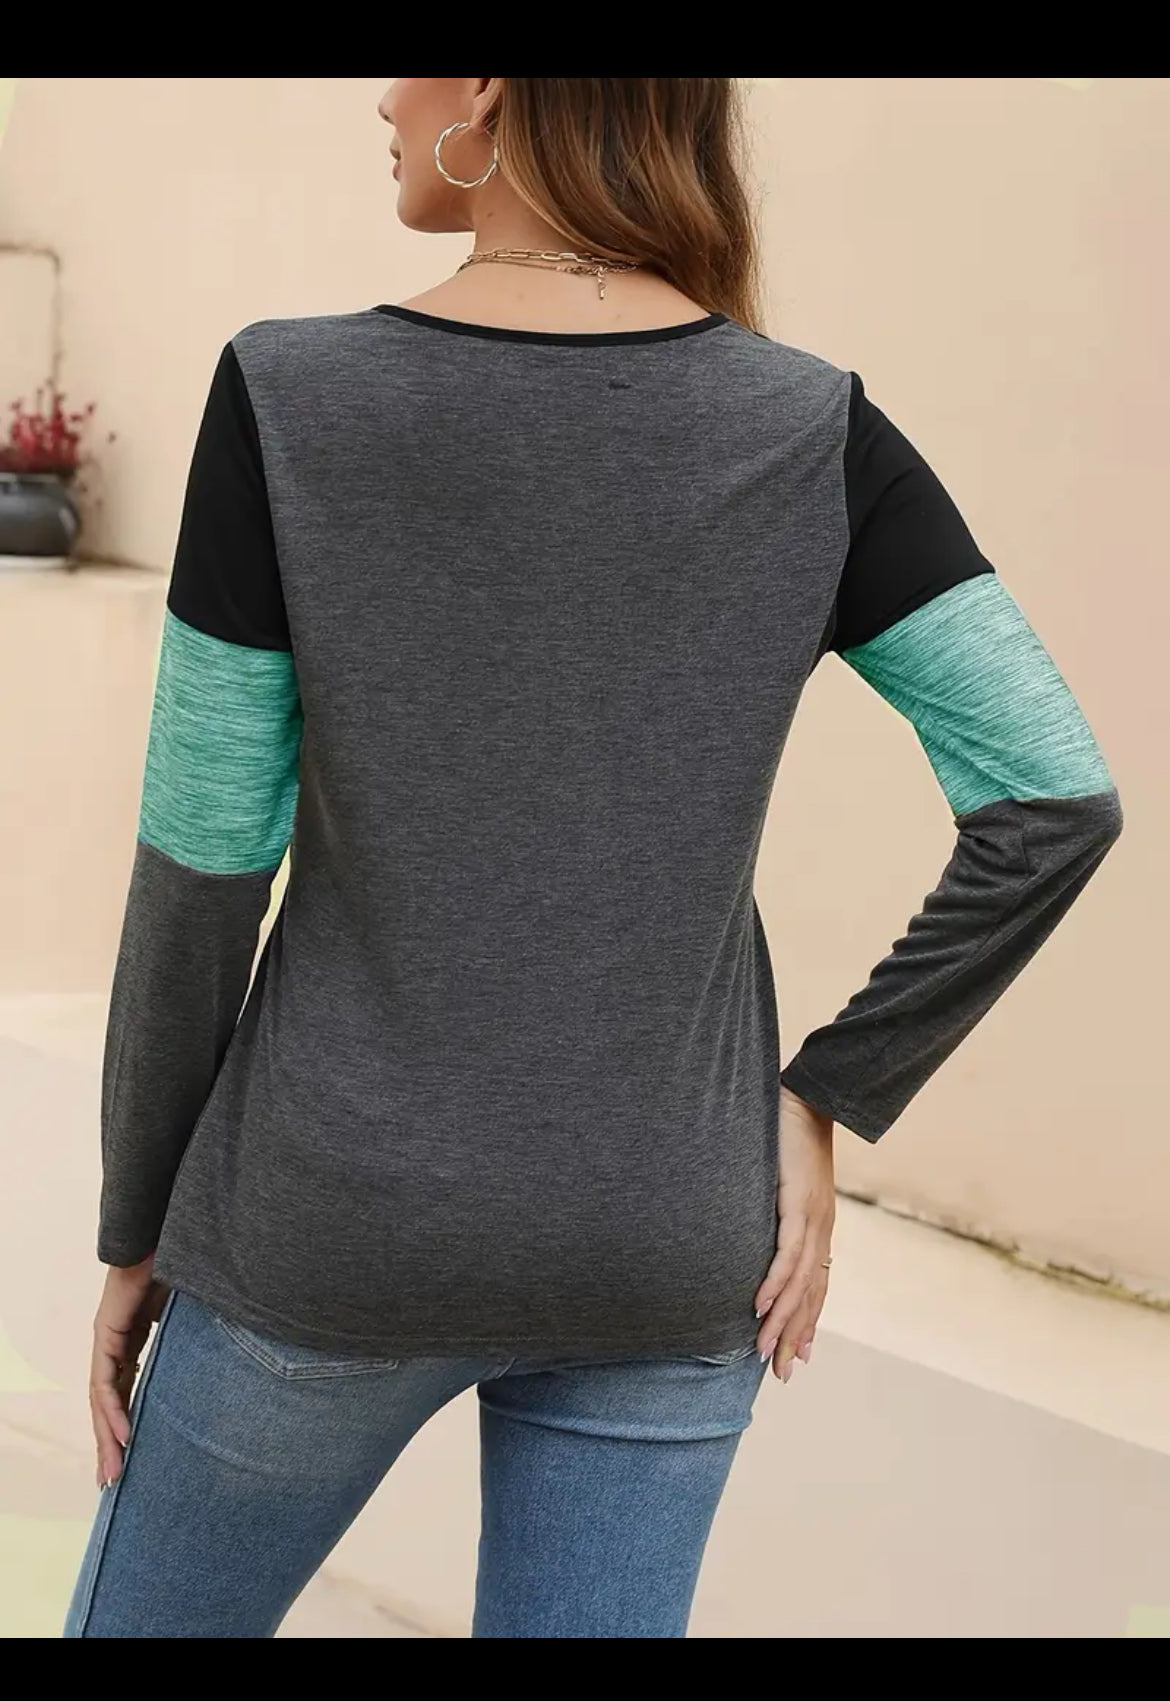 Women's Maternity Contrast Color T-shirt Long Sleeve Breast Feeding Tees, Baby 🌟🌙 Bumps Collection